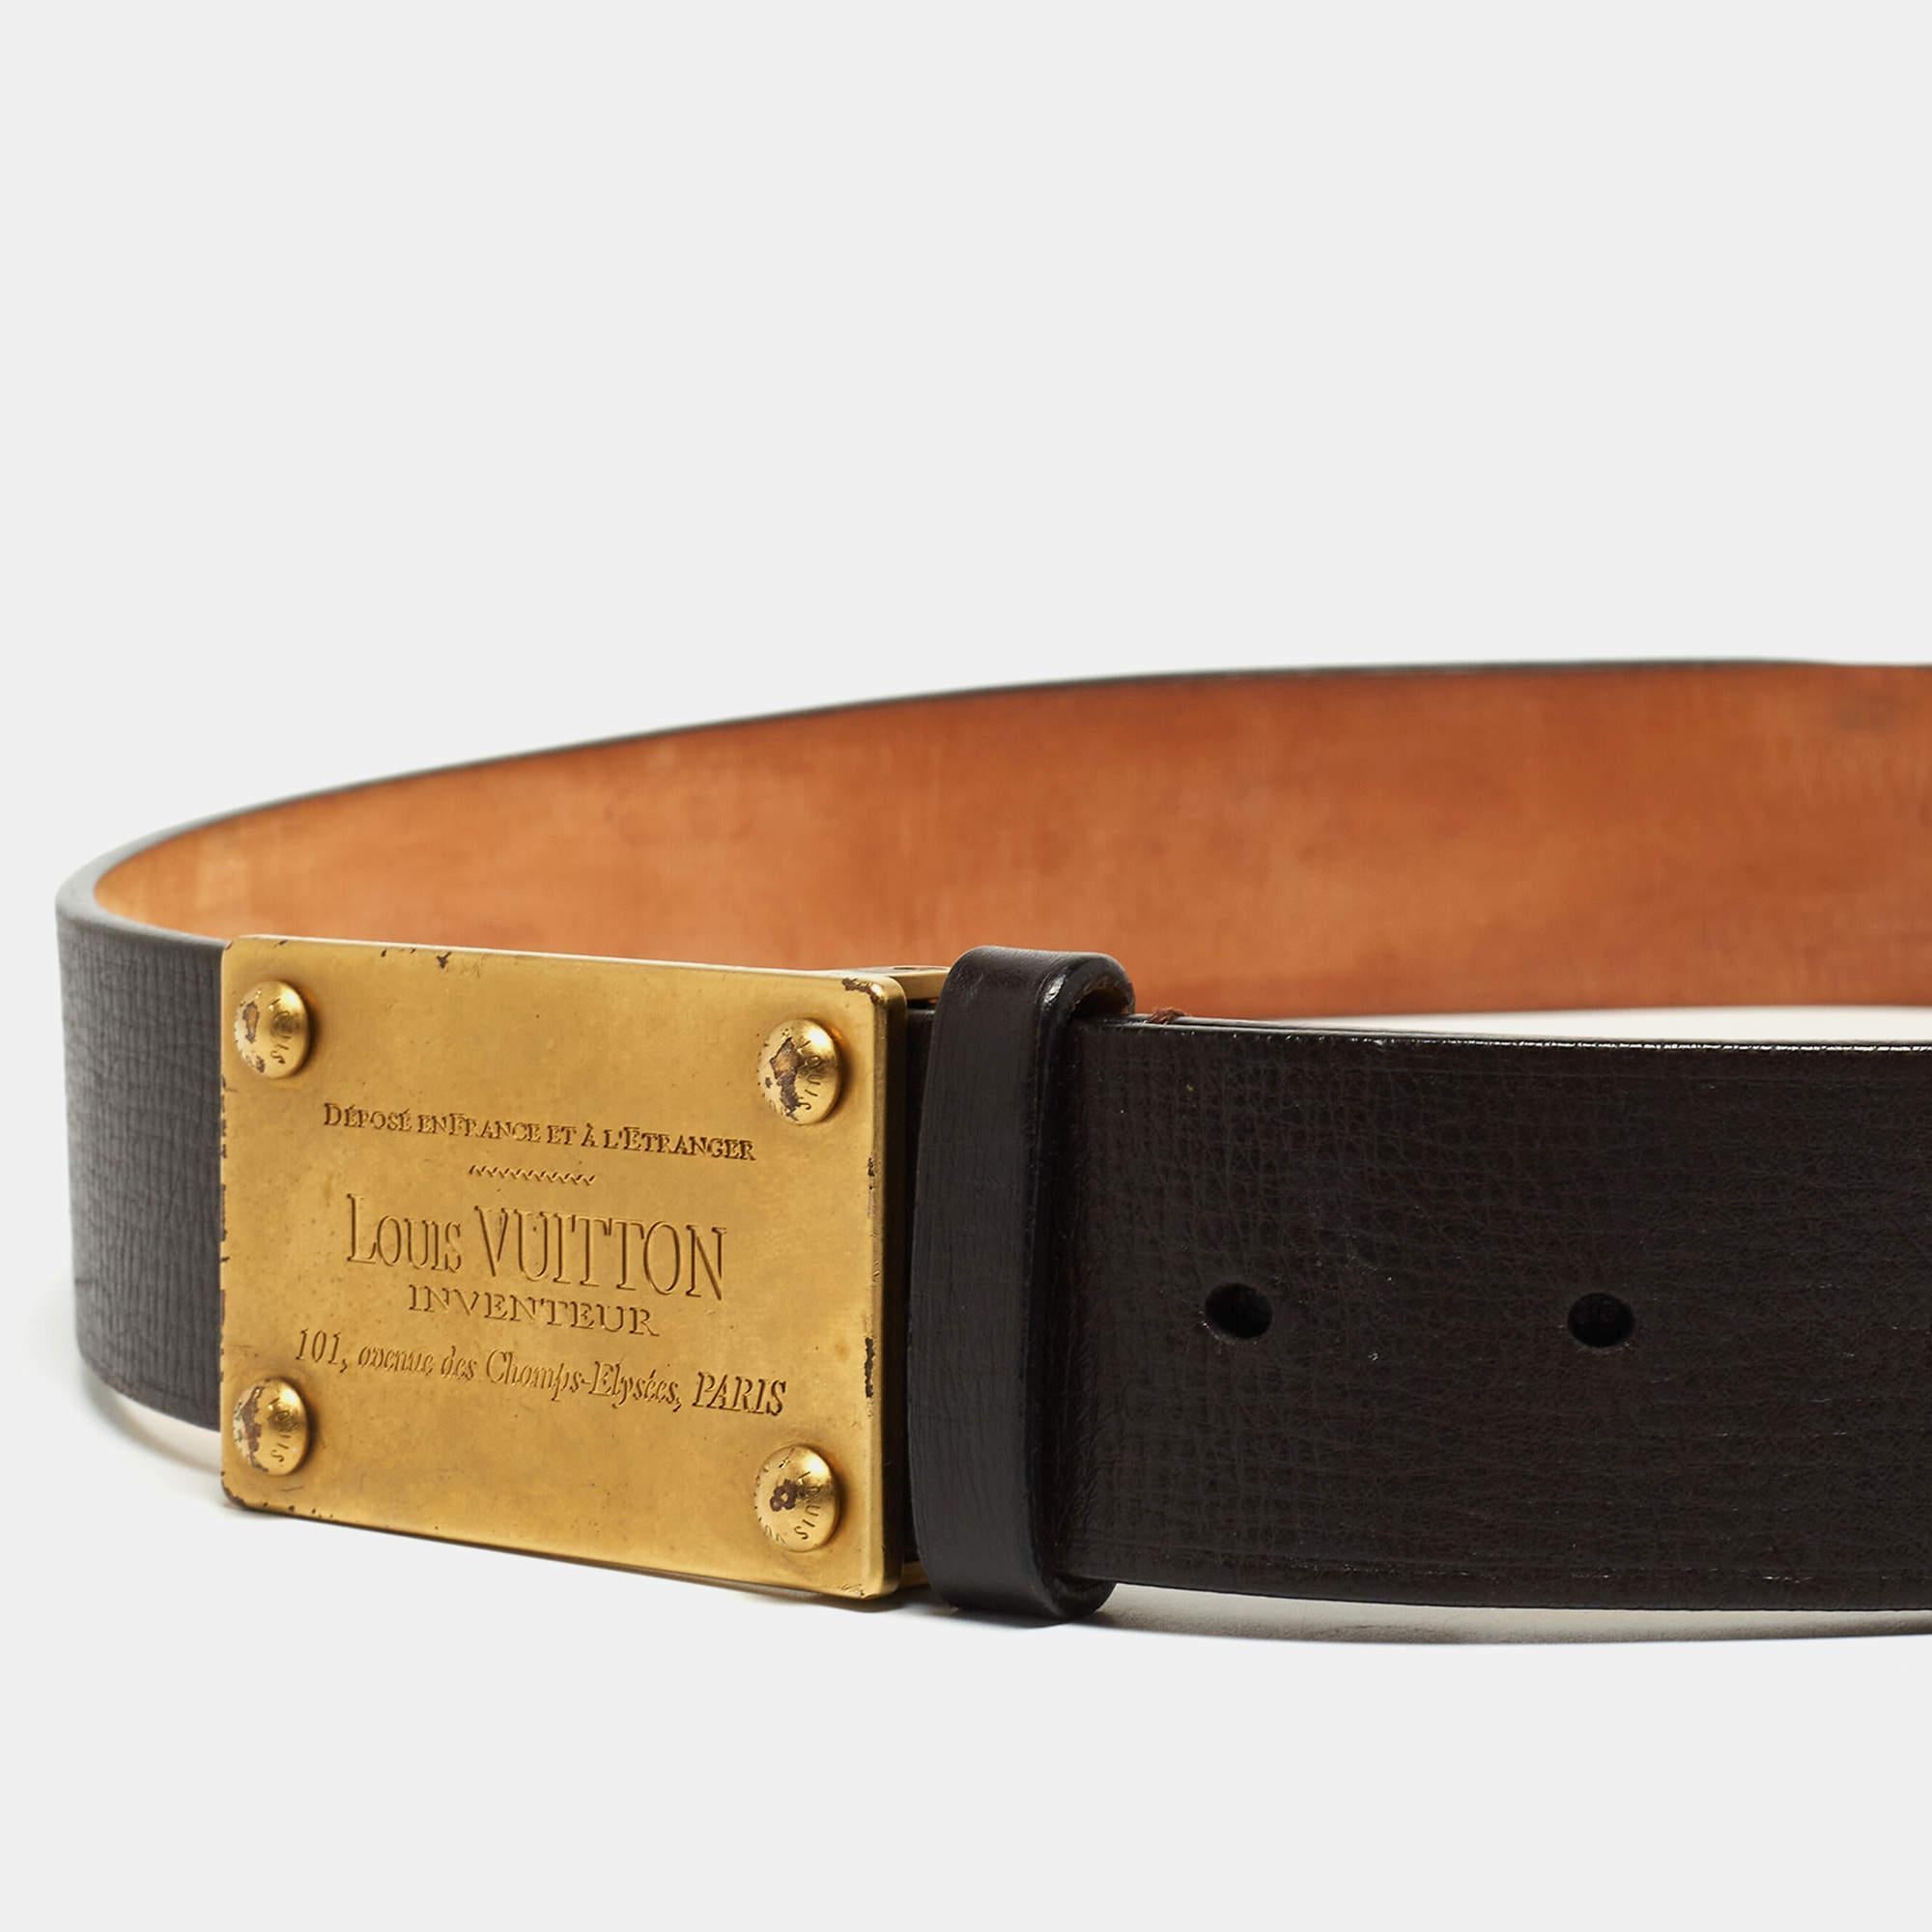 Add a sleek finish to your OOTD with this authentic Louis Vuitton dark brown belt. It is carefully crafted to last well and boost your style for a long time.

